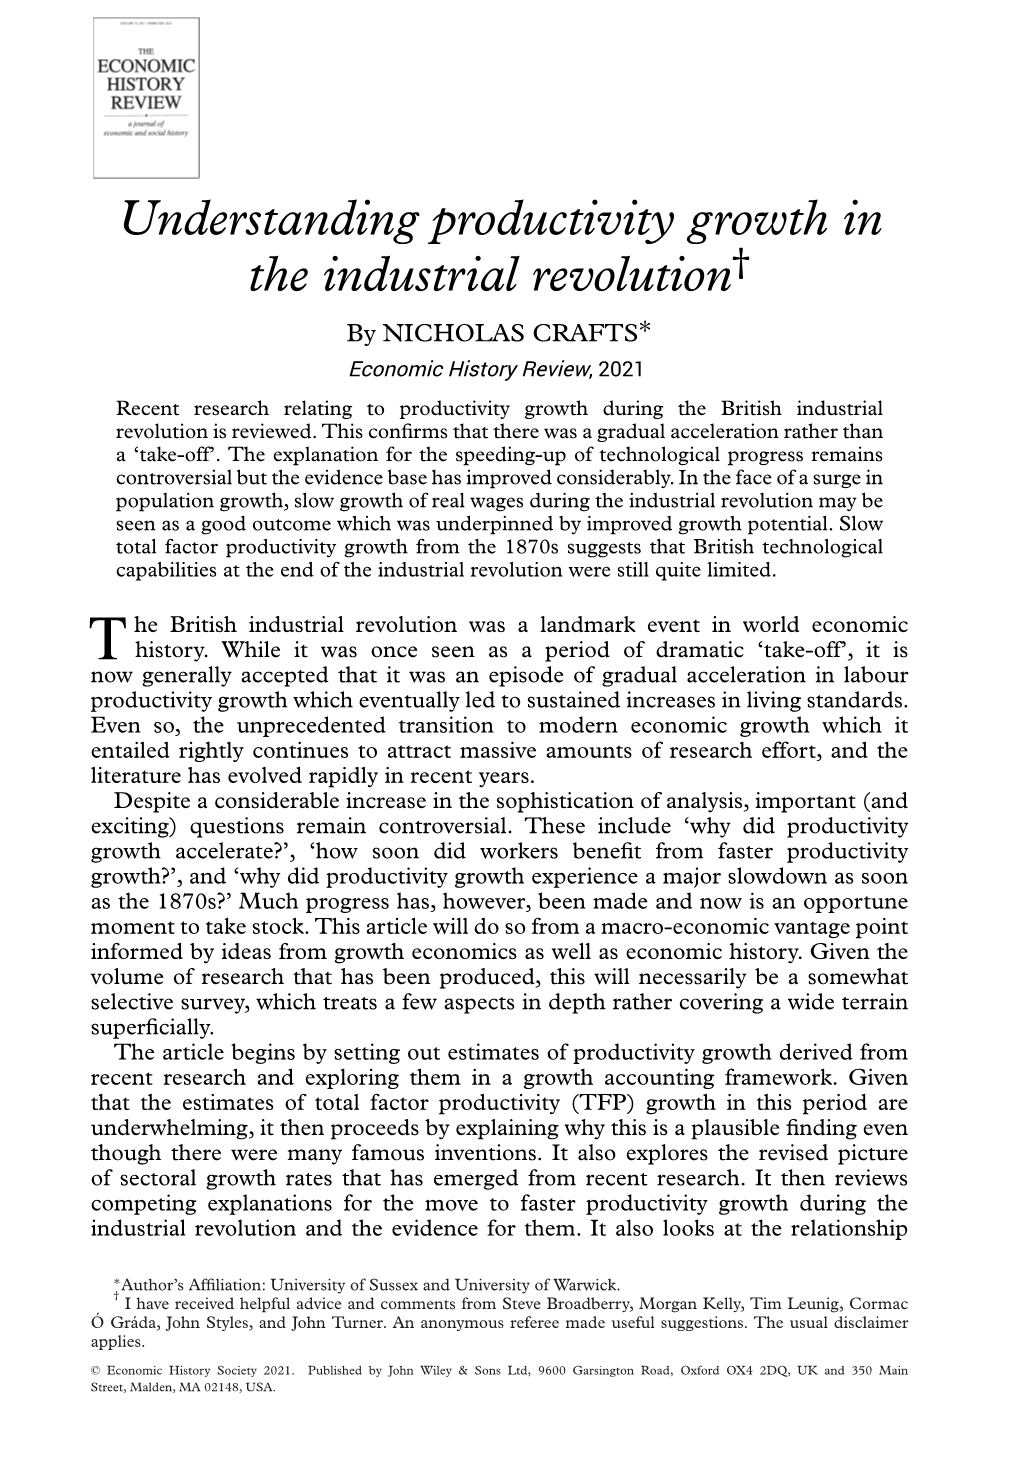 Understanding Productivity Growth in the Industrial Revolution